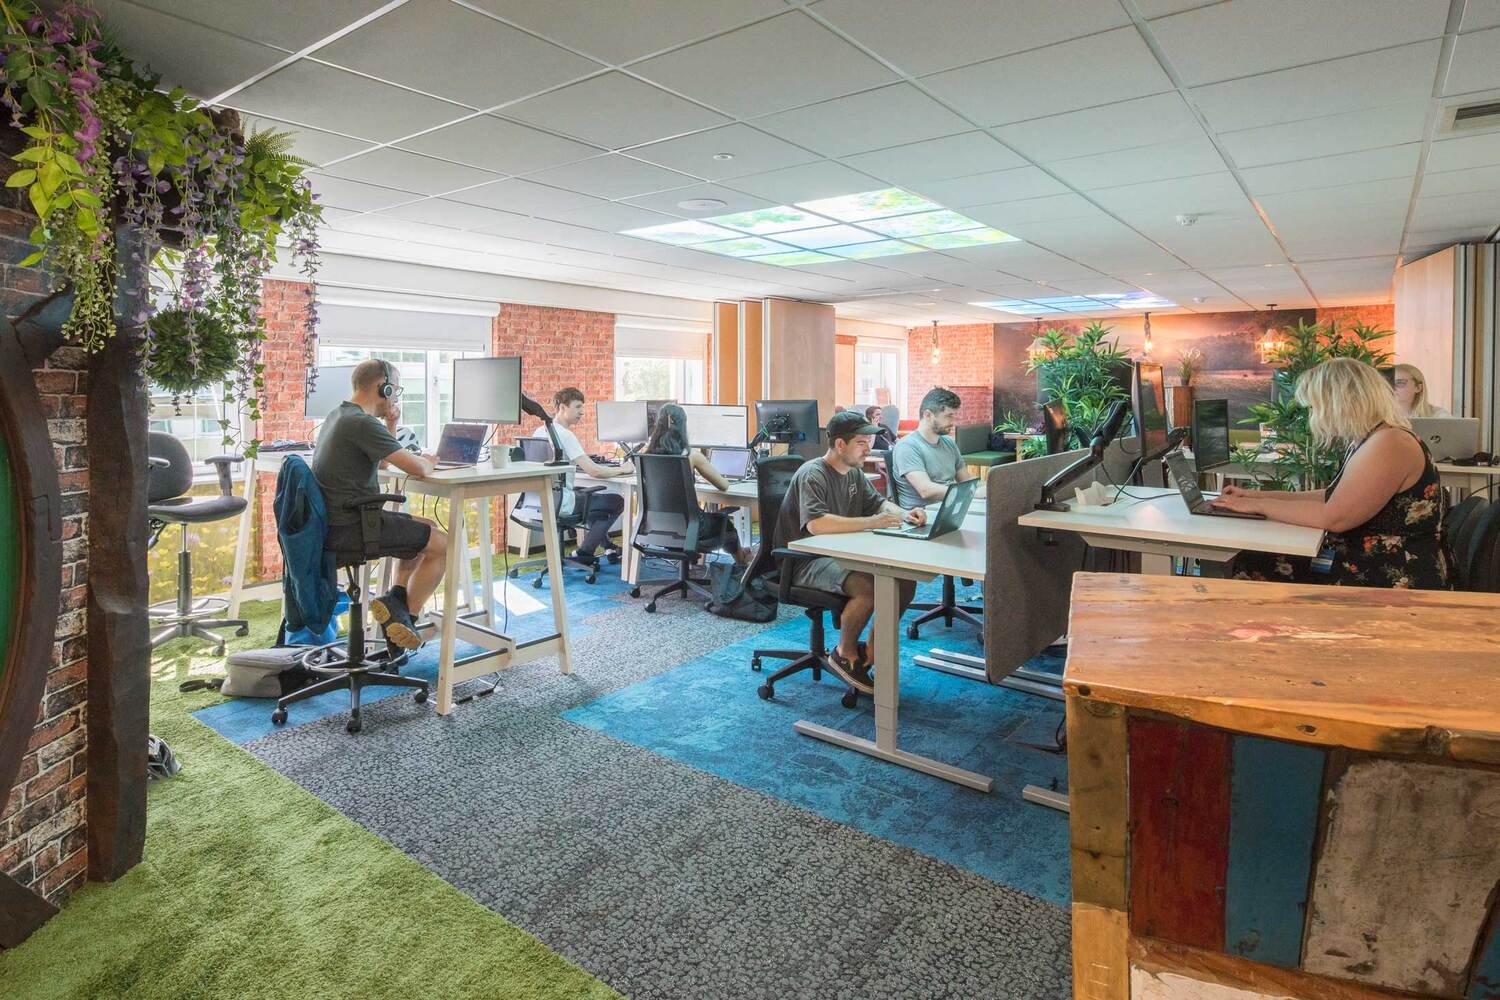 A flexible work space to rent in heart of Bristol